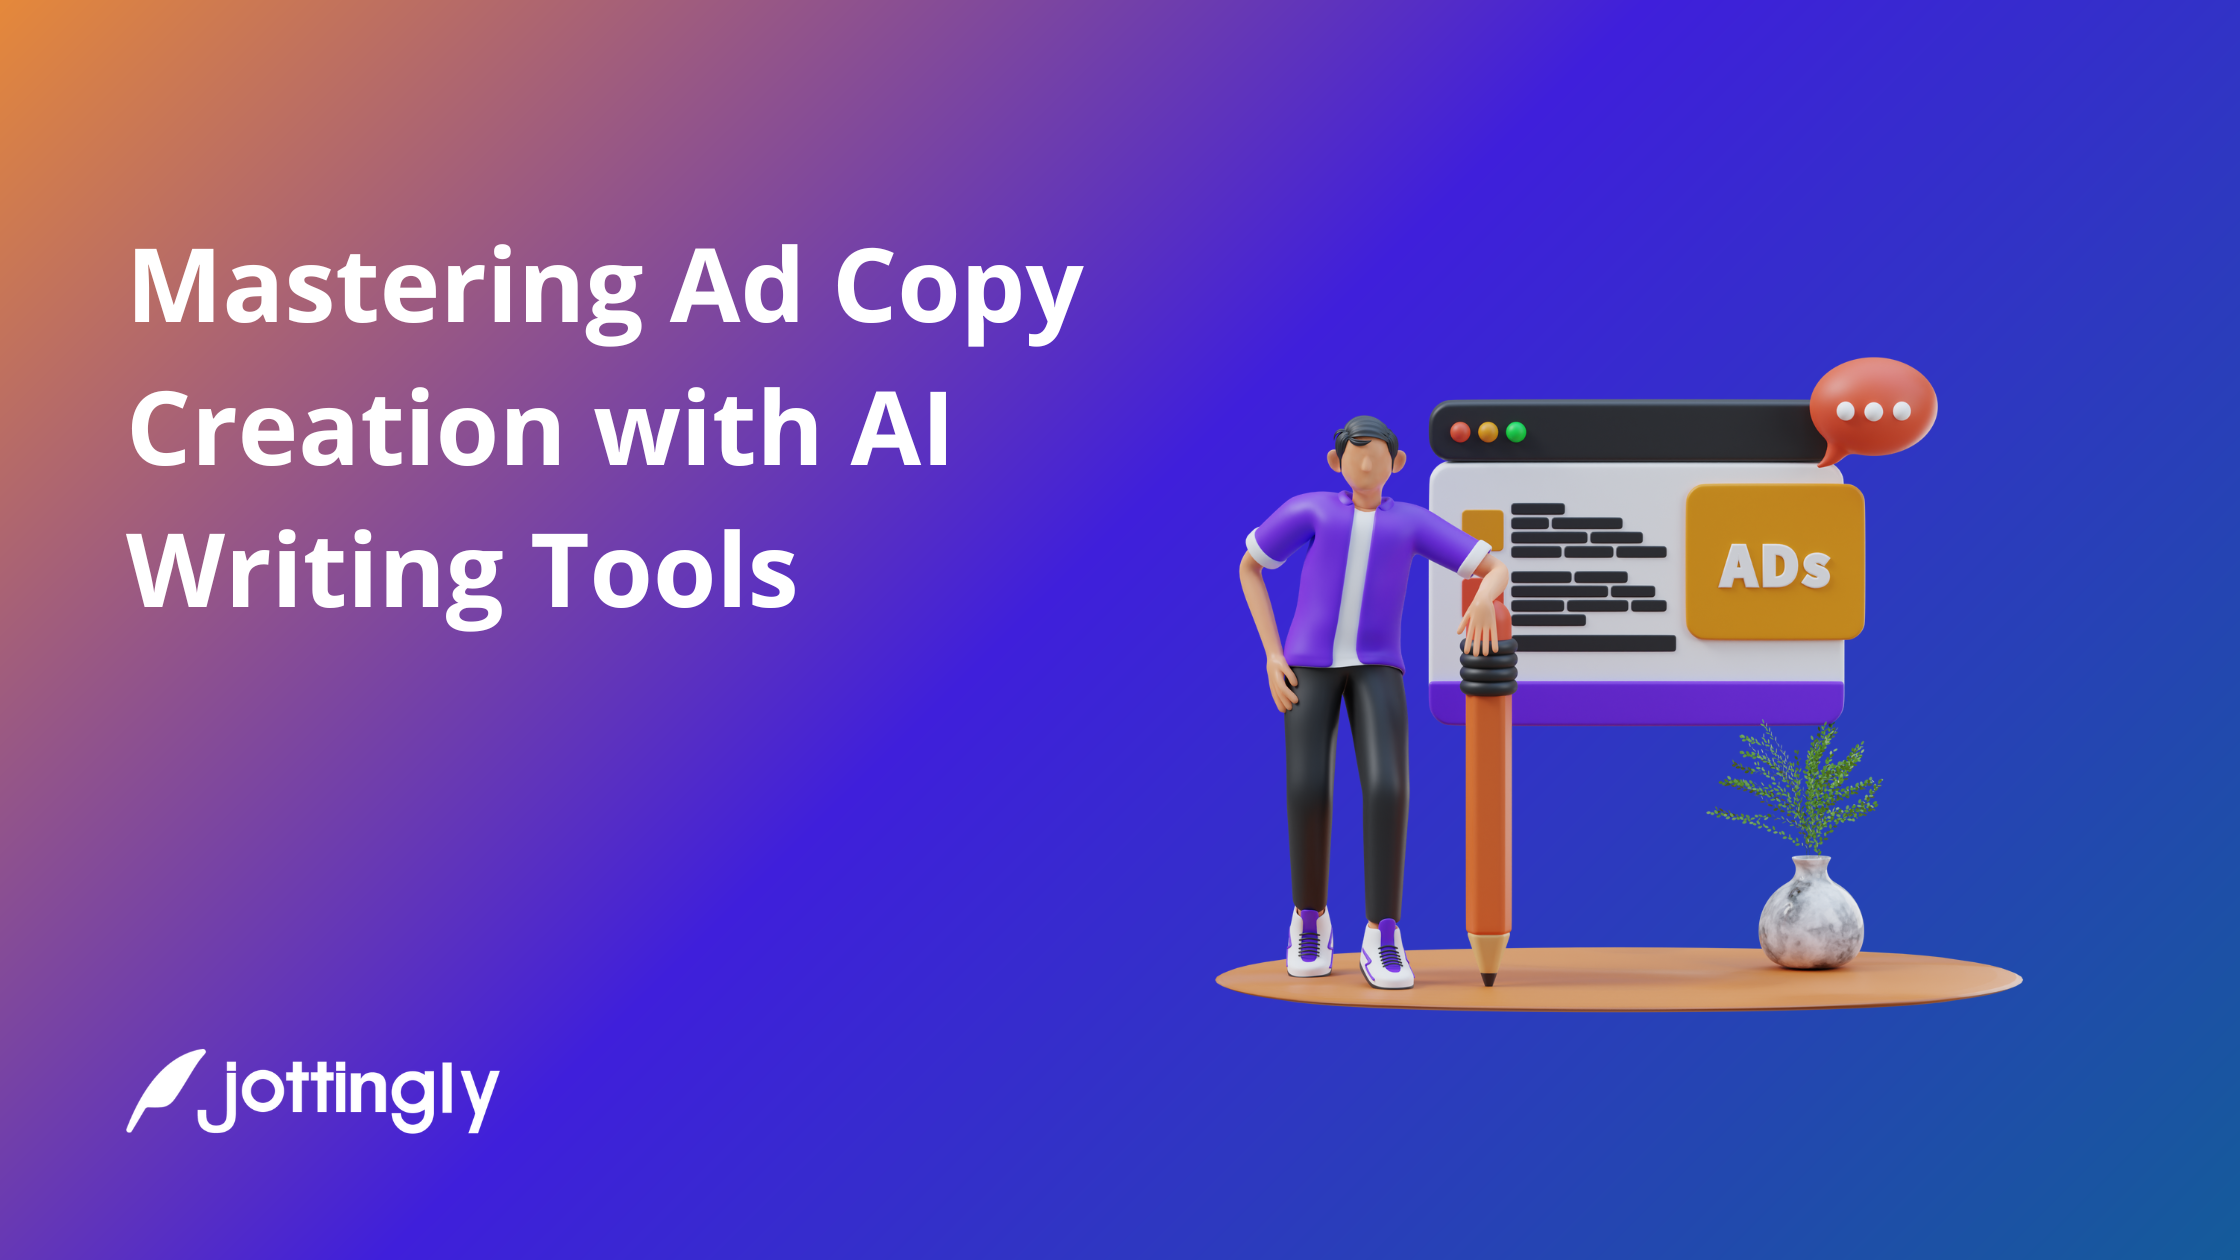 Mastering Ad Copy Creation with AI Writing Tools